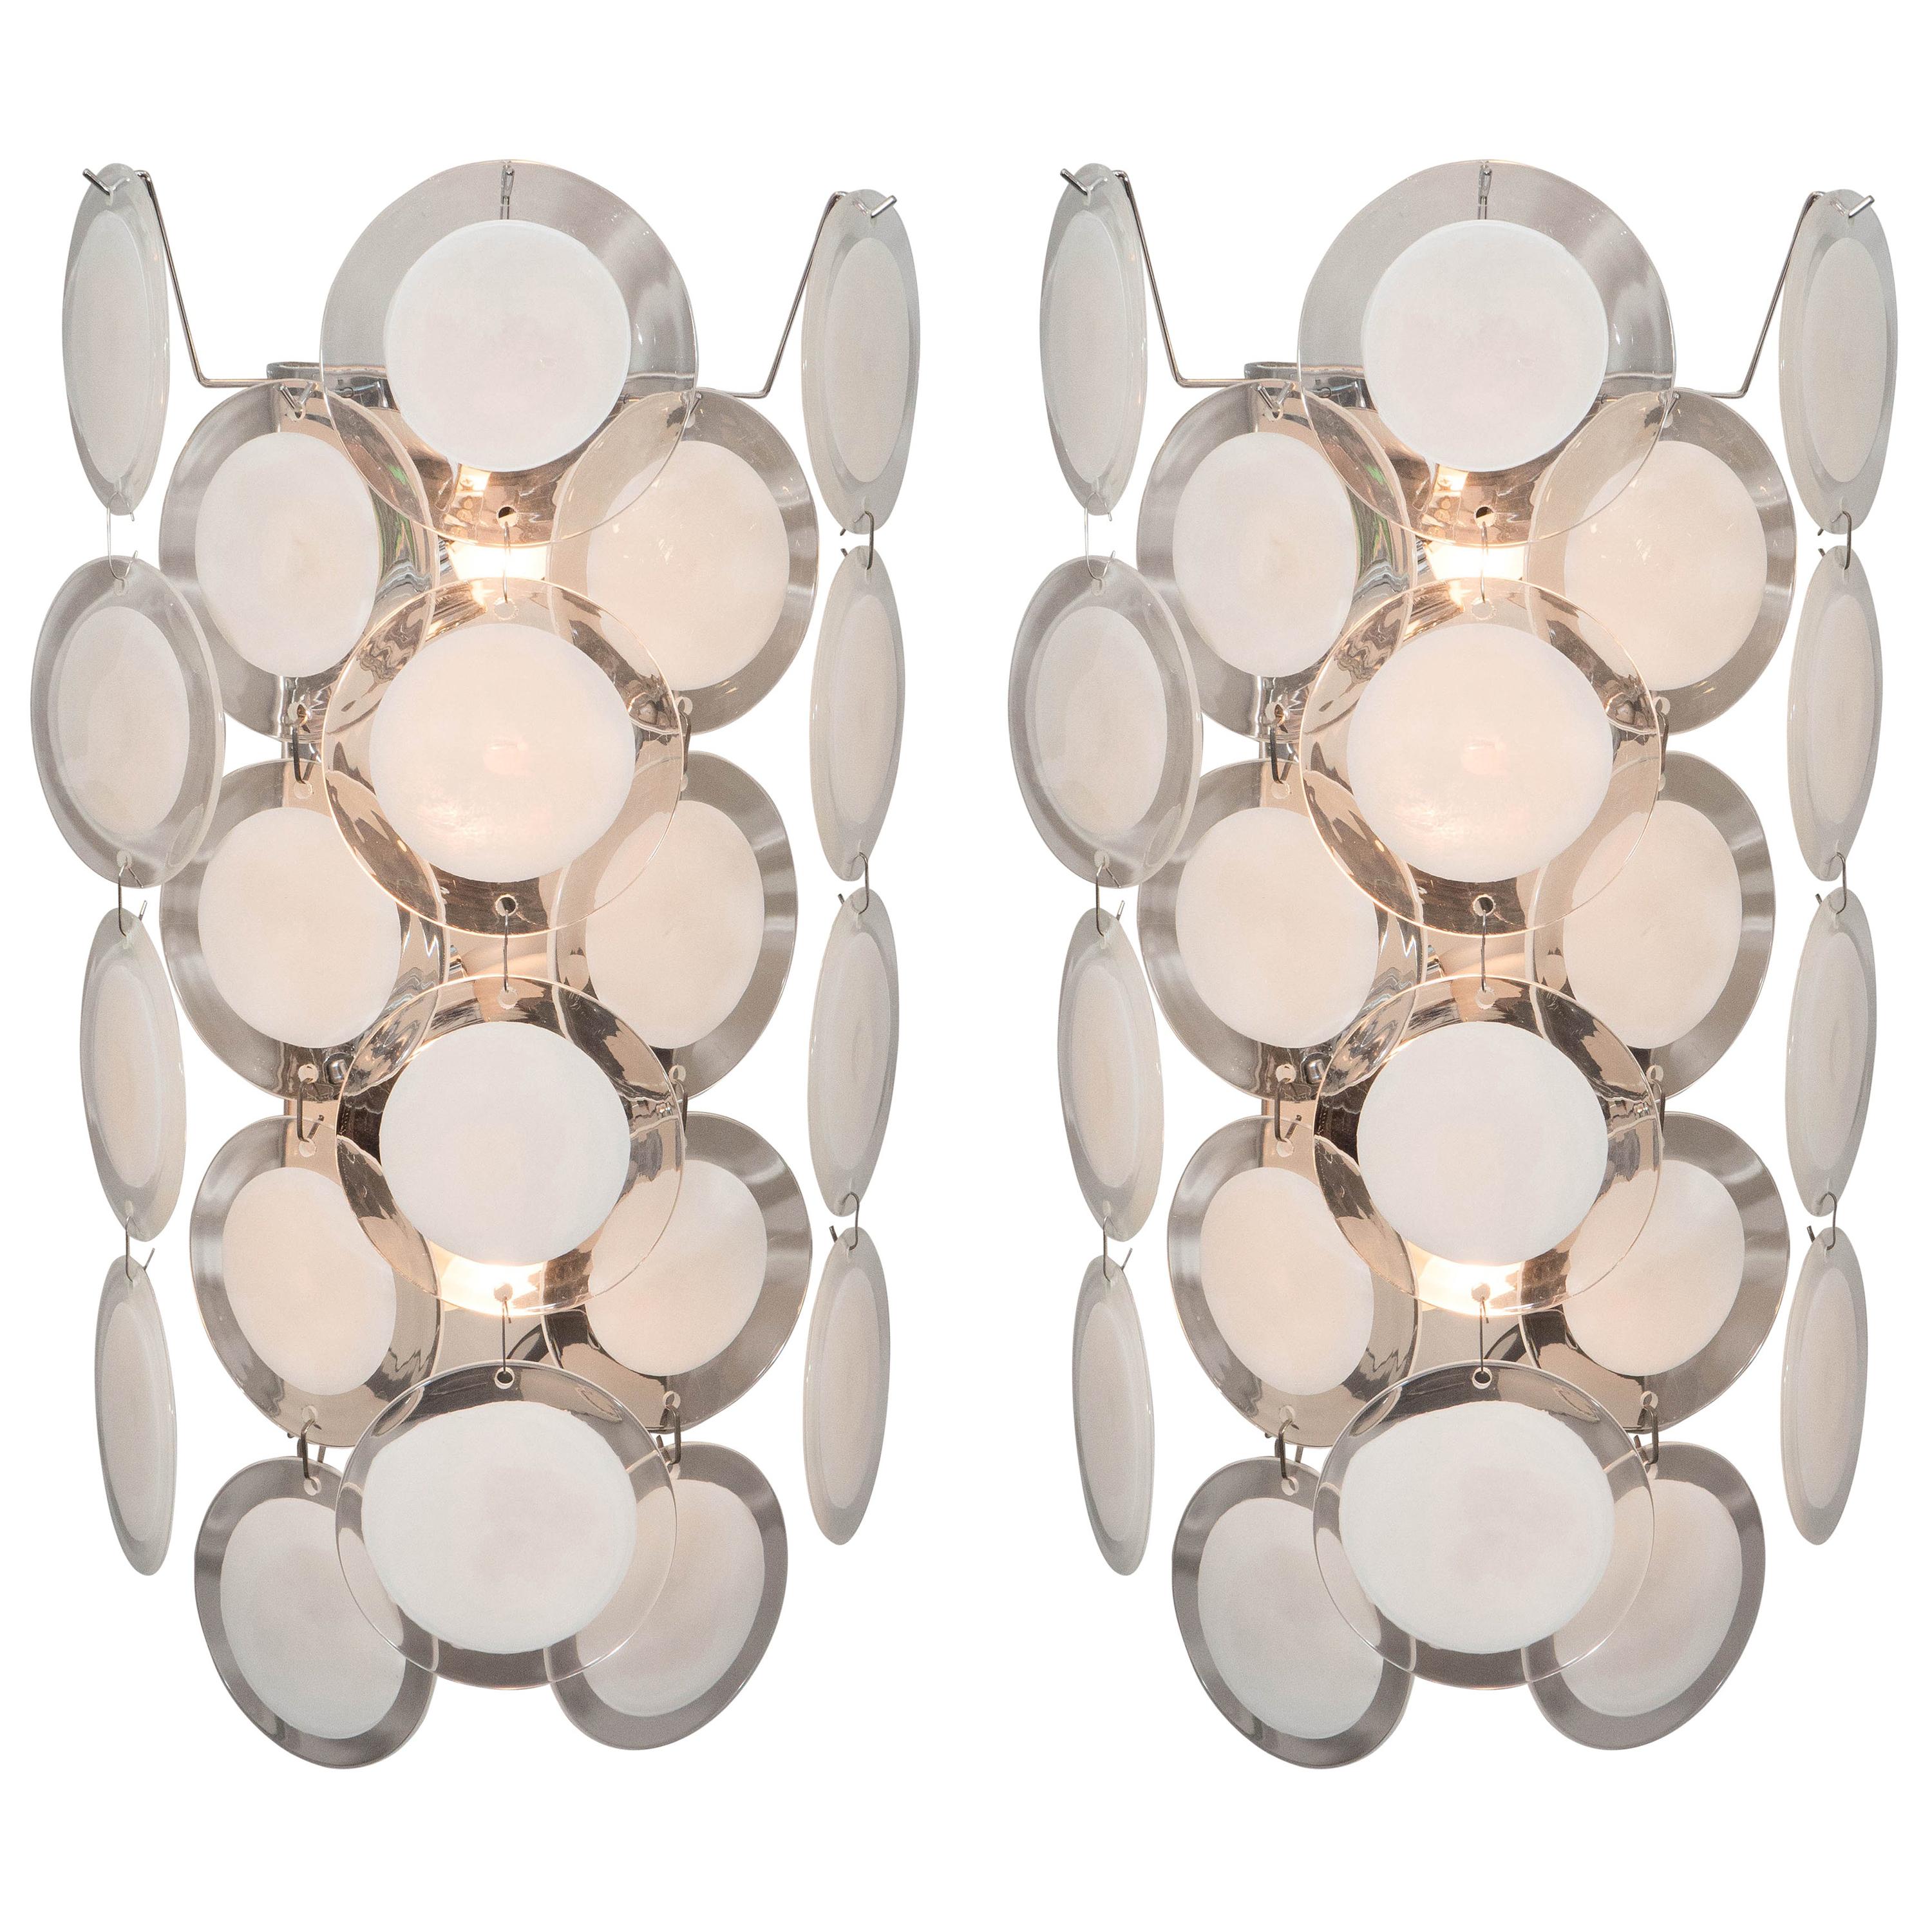 Pair of White Murano Glass Disc Sconces